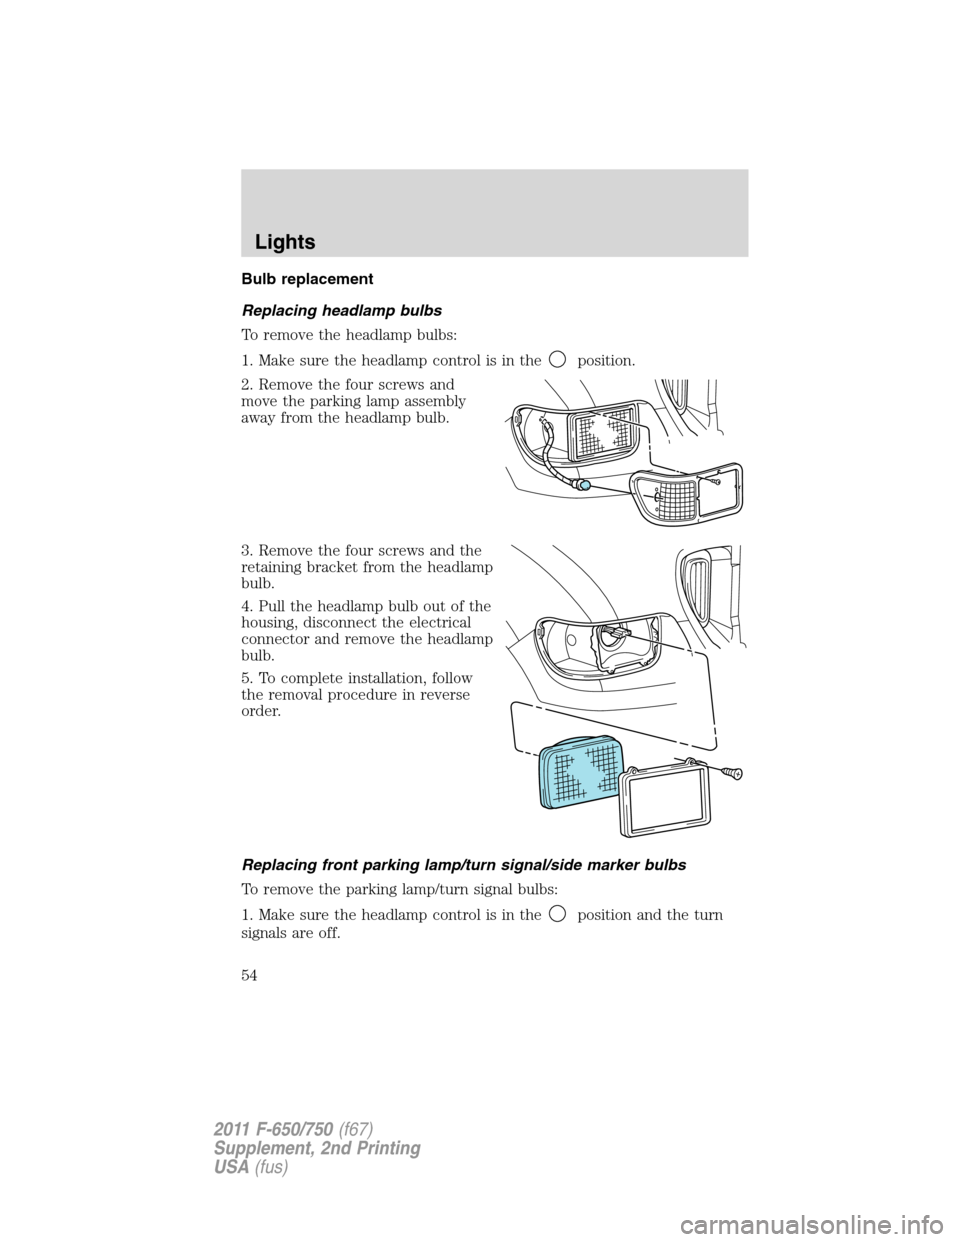 FORD F650 2011 12.G Owners Manual Bulb replacement
Replacing headlamp bulbs
To remove the headlamp bulbs:
1. Make sure the headlamp control is in the
position.
2. Remove the four screws and
move the parking lamp assembly
away from the